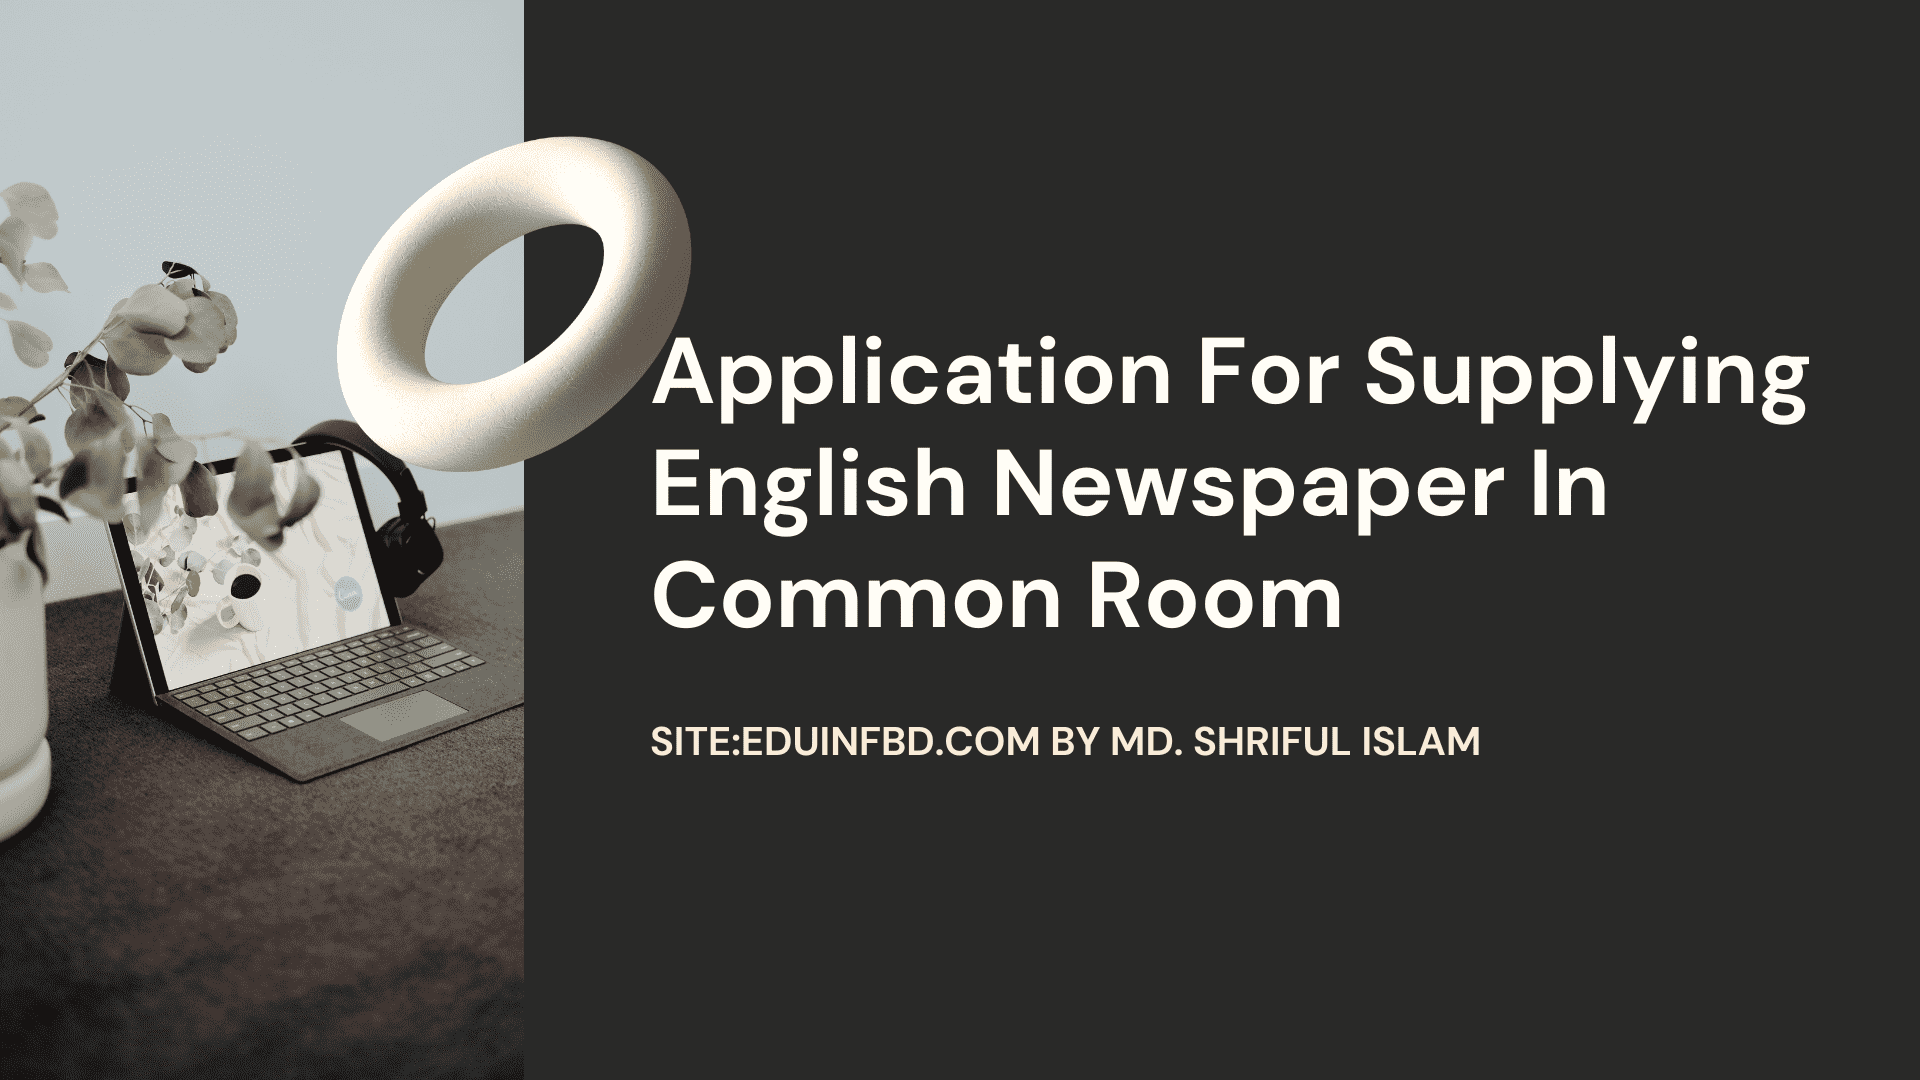 Application For Supplying English Newspaper In Common Room